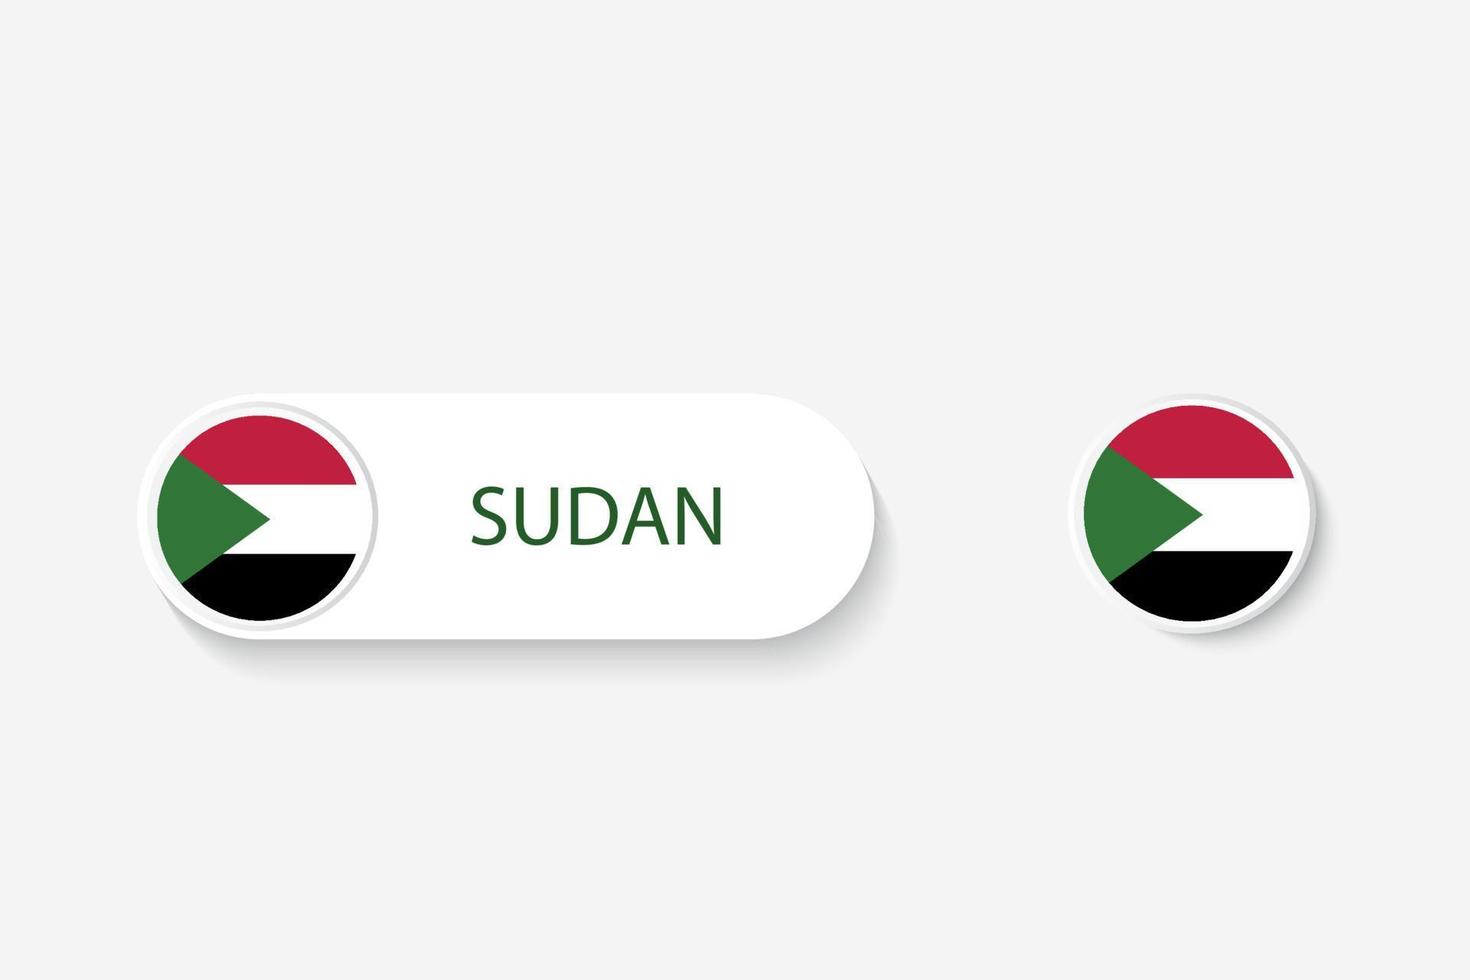 Sudan button flag in illustration of oval shaped with word of Sudan. And button flag Sudan. vector